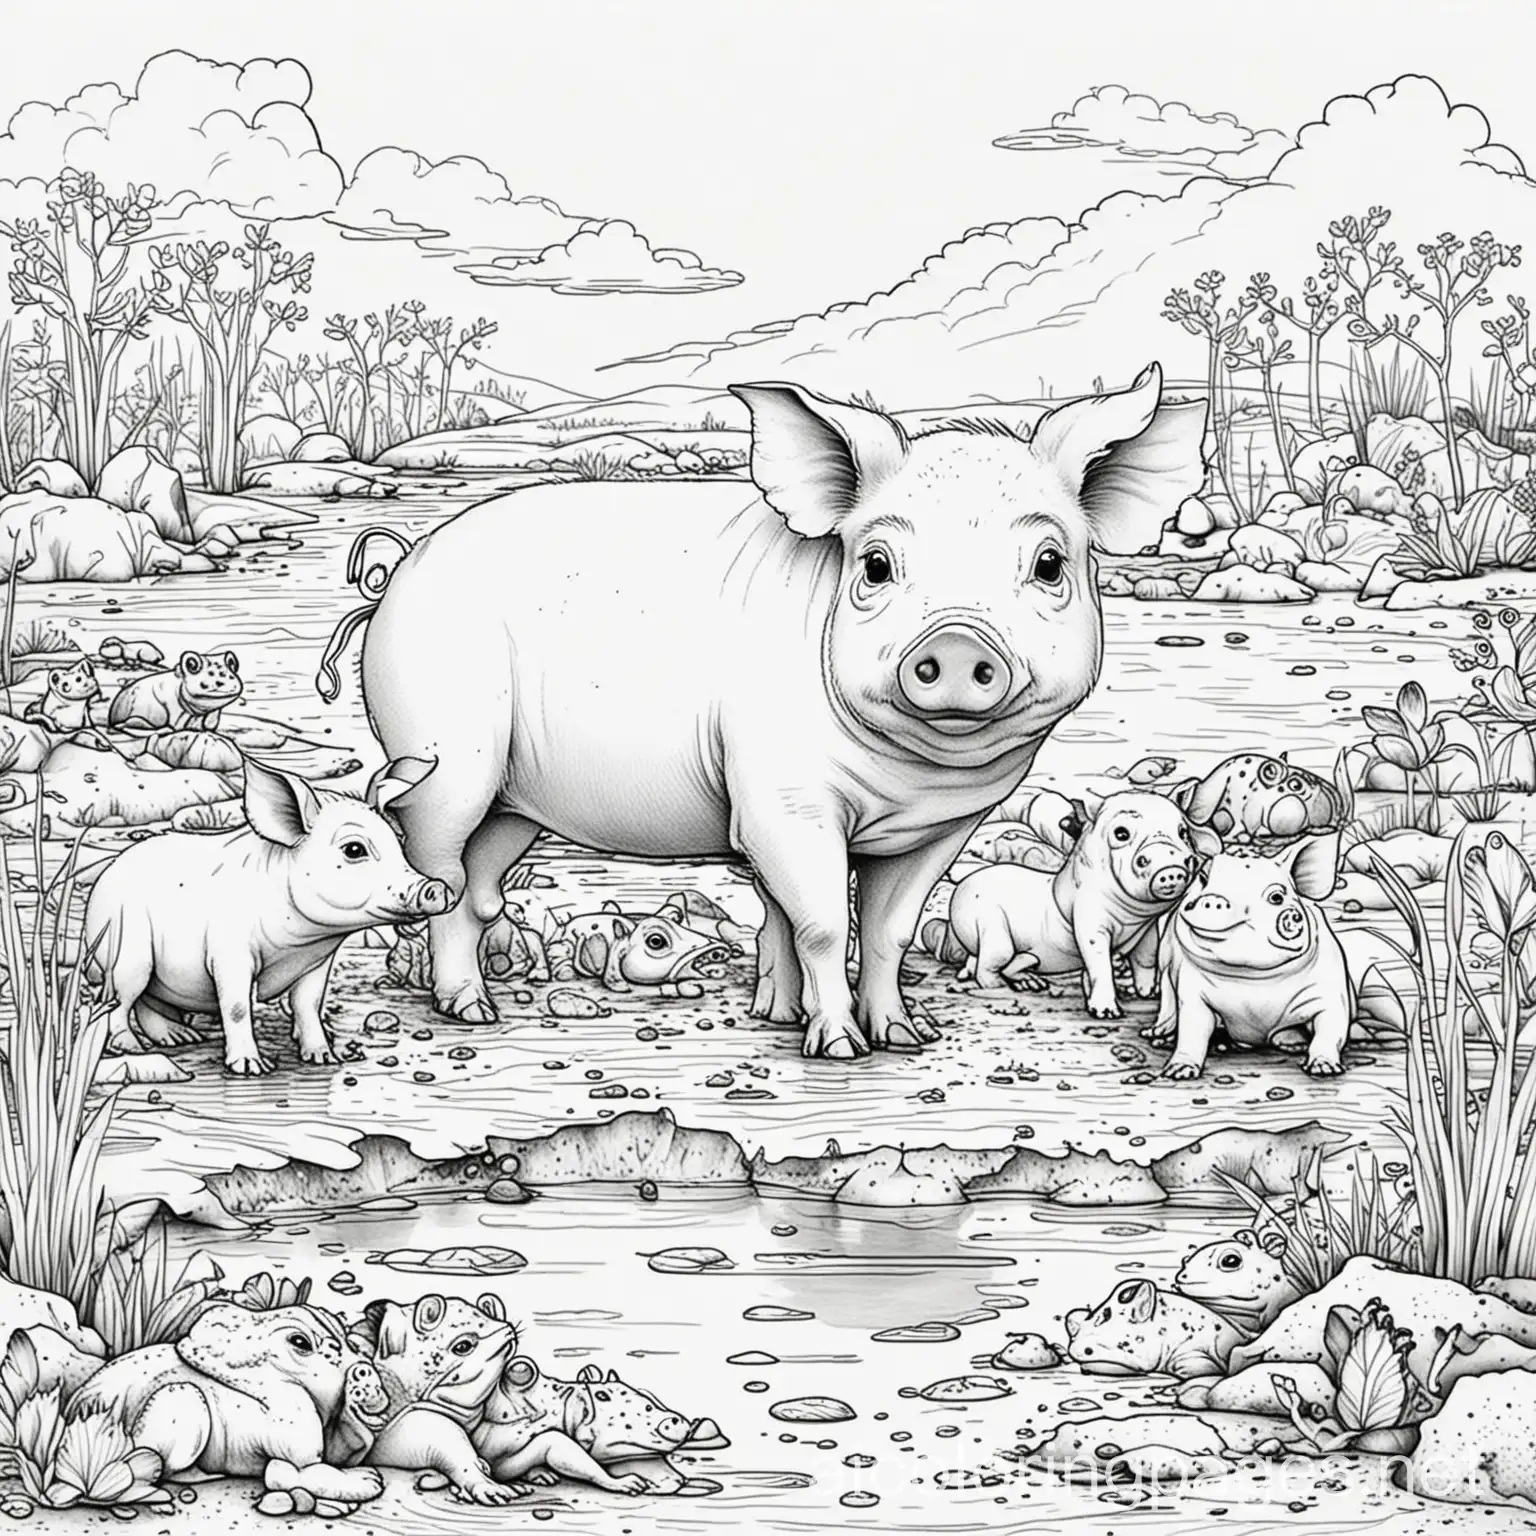 Coloring-Page-Pig-Frogs-and-Dogs-in-Black-and-White